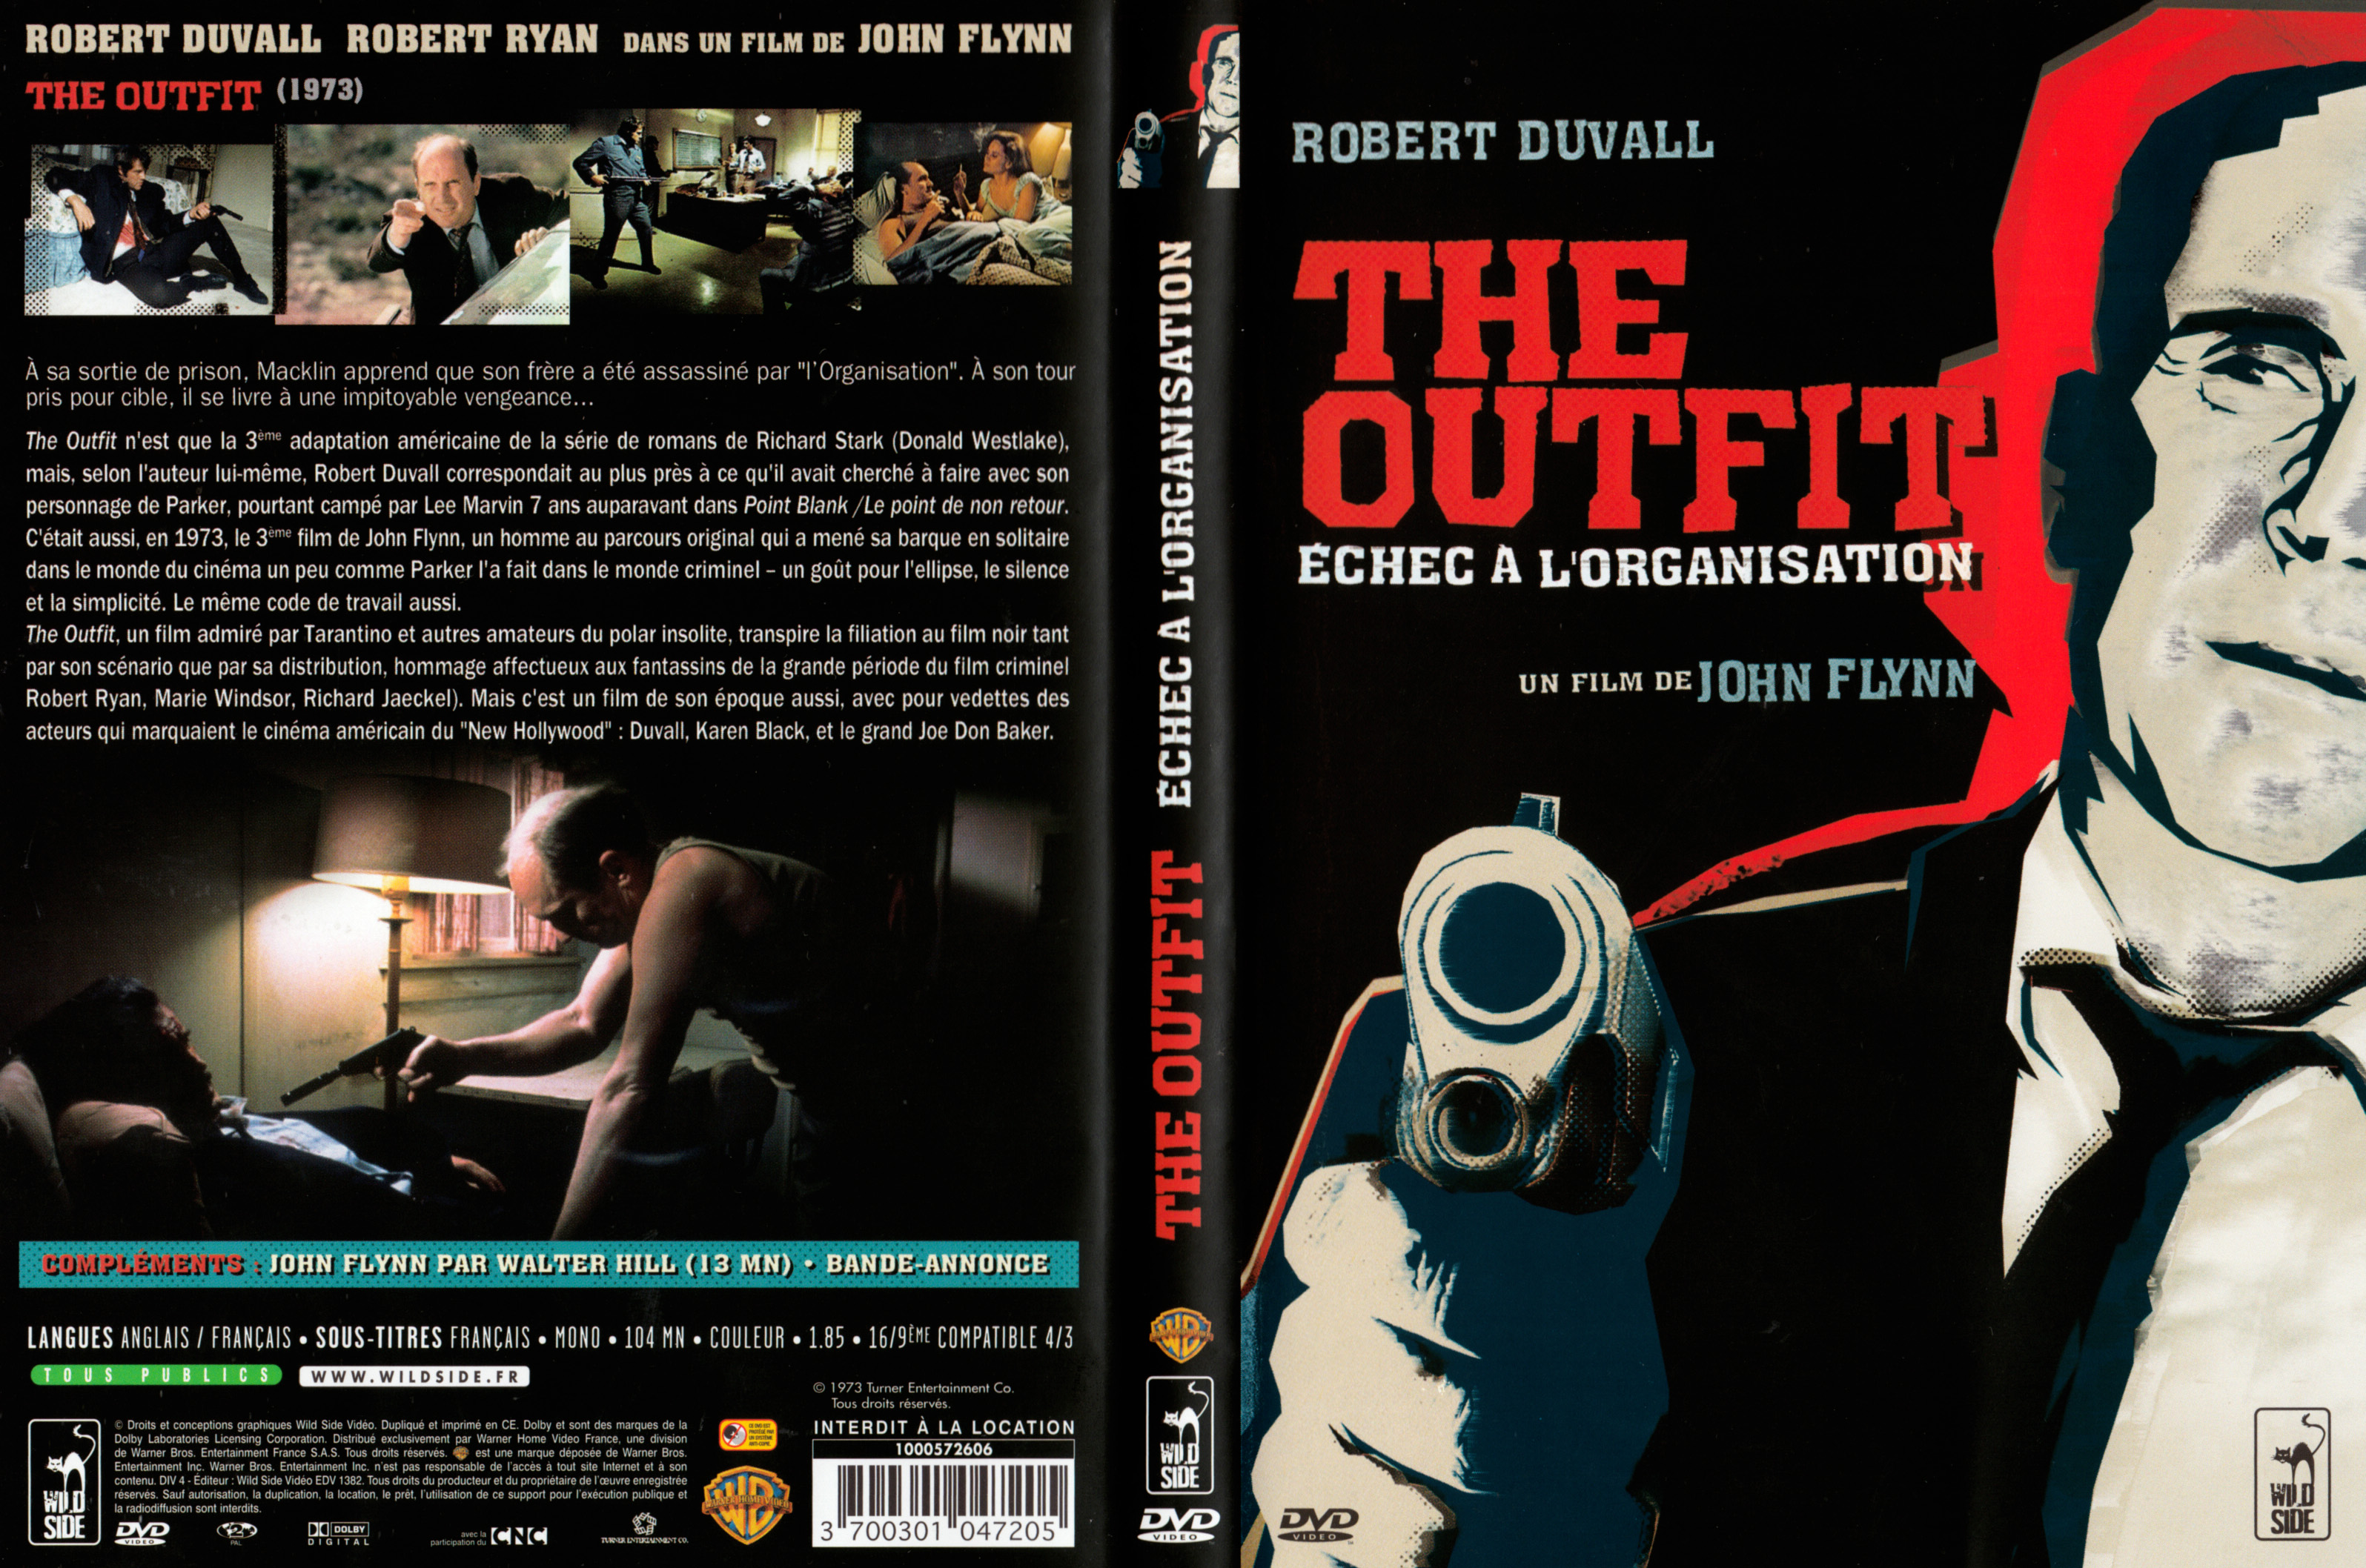 Jaquette DVD The outfit v2